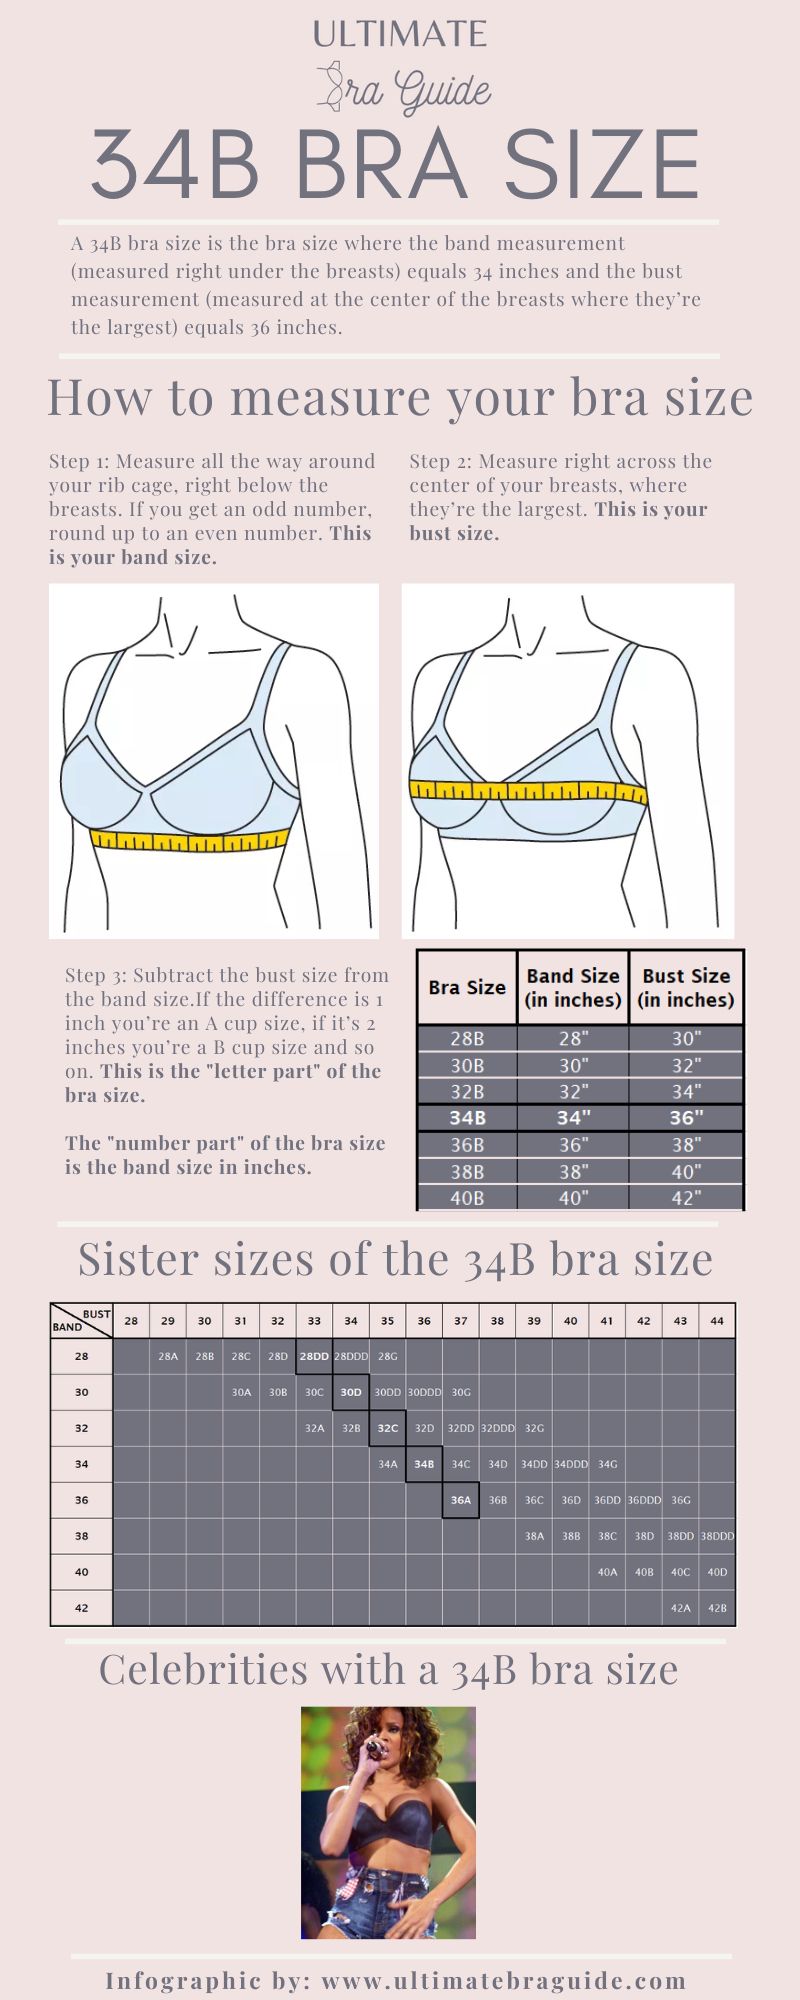 An infographic all about the 34B bra size - what it is, how to measure if you're 34B bra size, 34B bra sister sizes, 34B cup examples, and so on